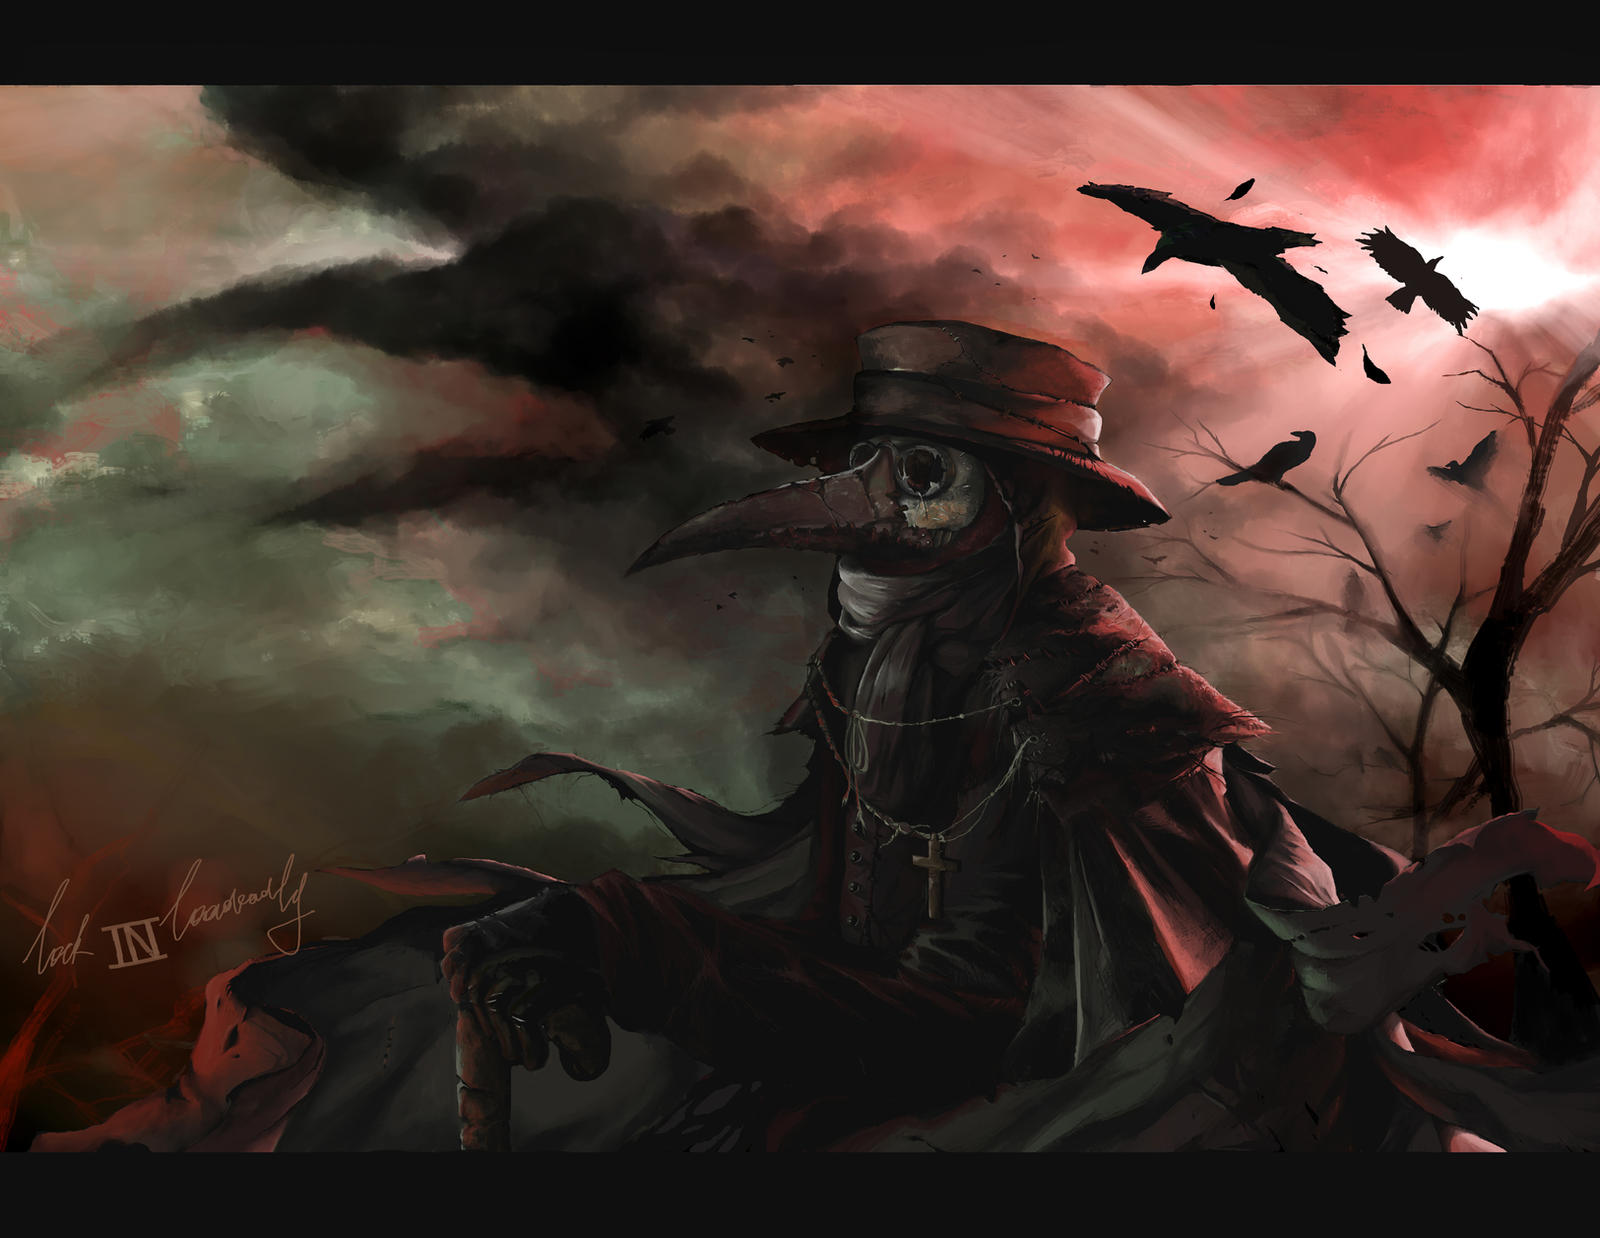 plague-doctor-the-black-death-comes-by-lockinloadeadly-on-deviantart